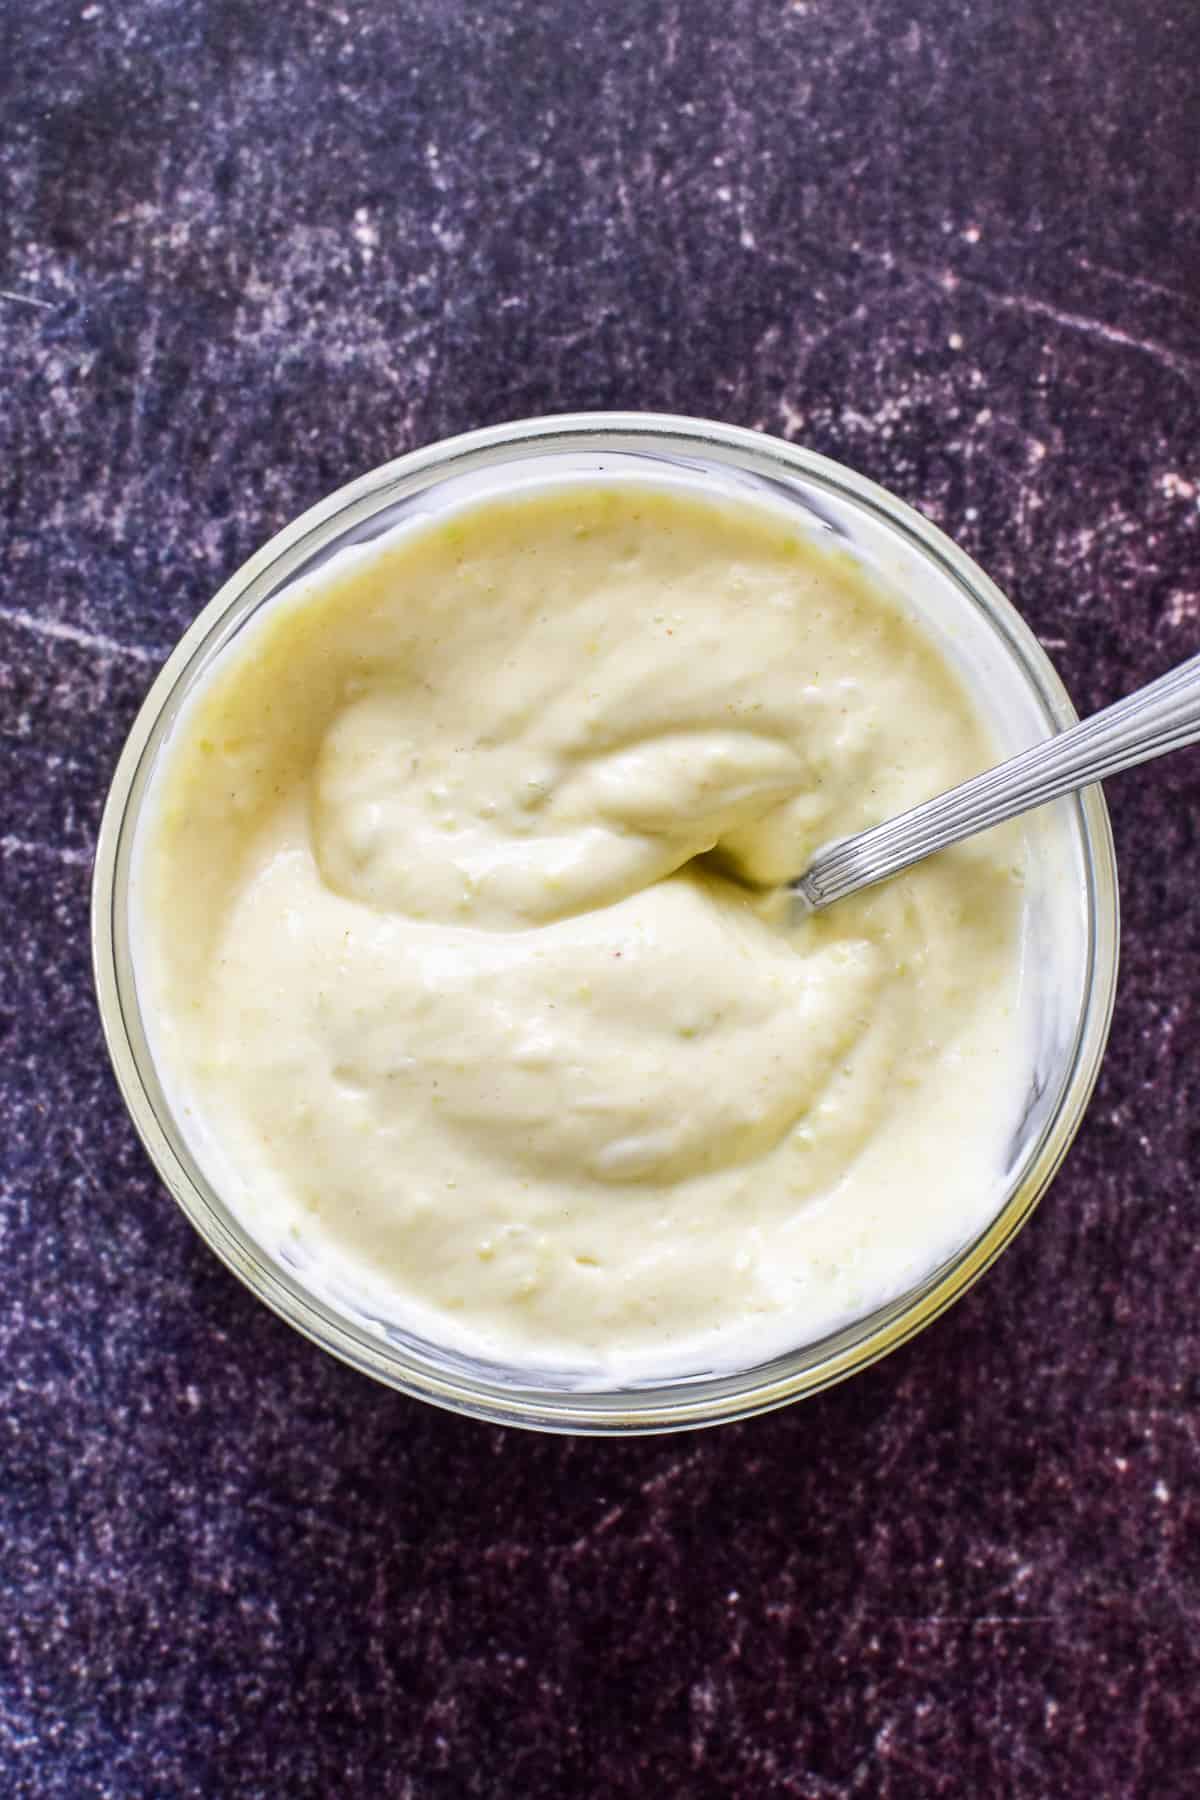 Wasabi Mayo ingredients combined in a glass mixing bowl with a silver spoon